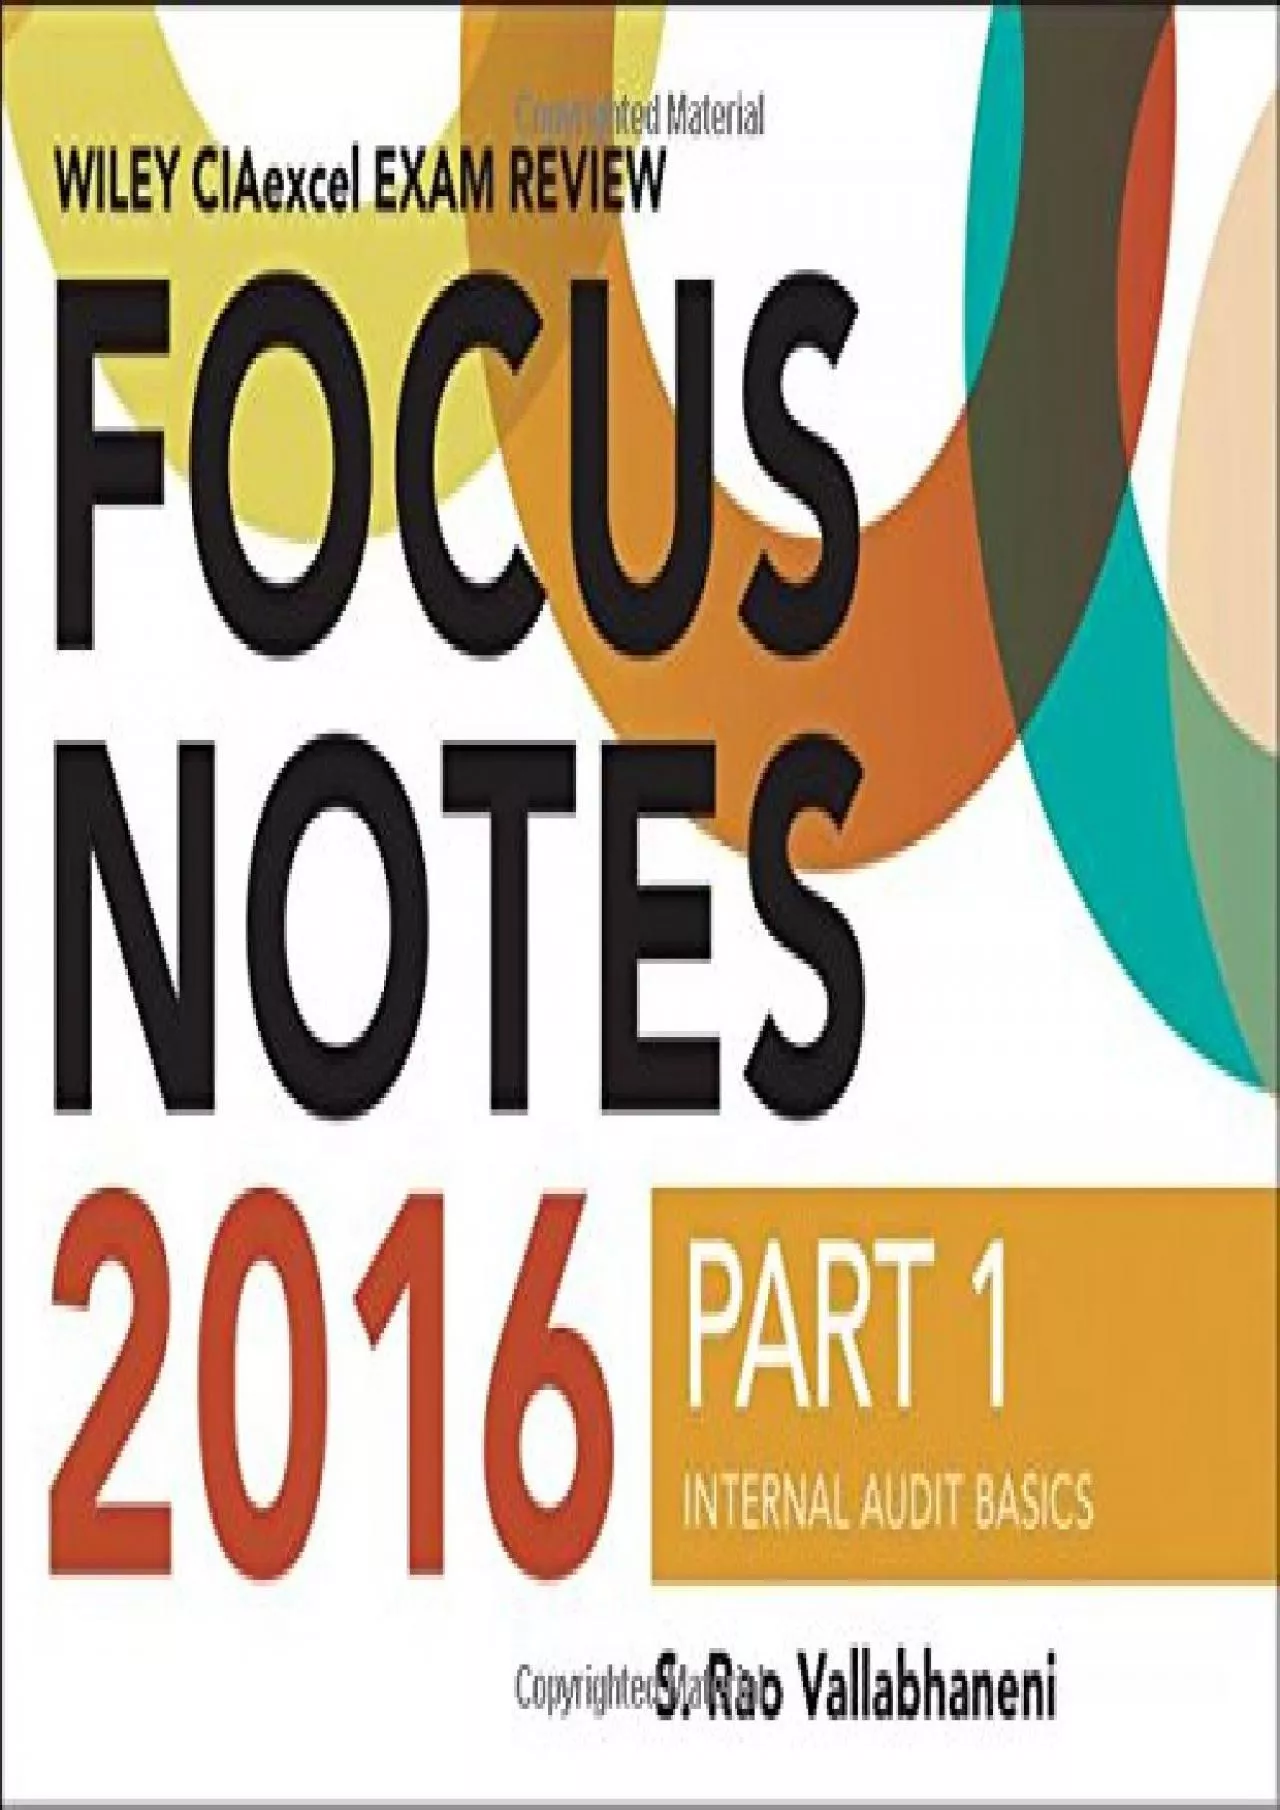 (EBOOK)-Wiley CIAexcel Exam Review 2016 Focus Notes: Part 1, Internal Audit Basics (Wiley